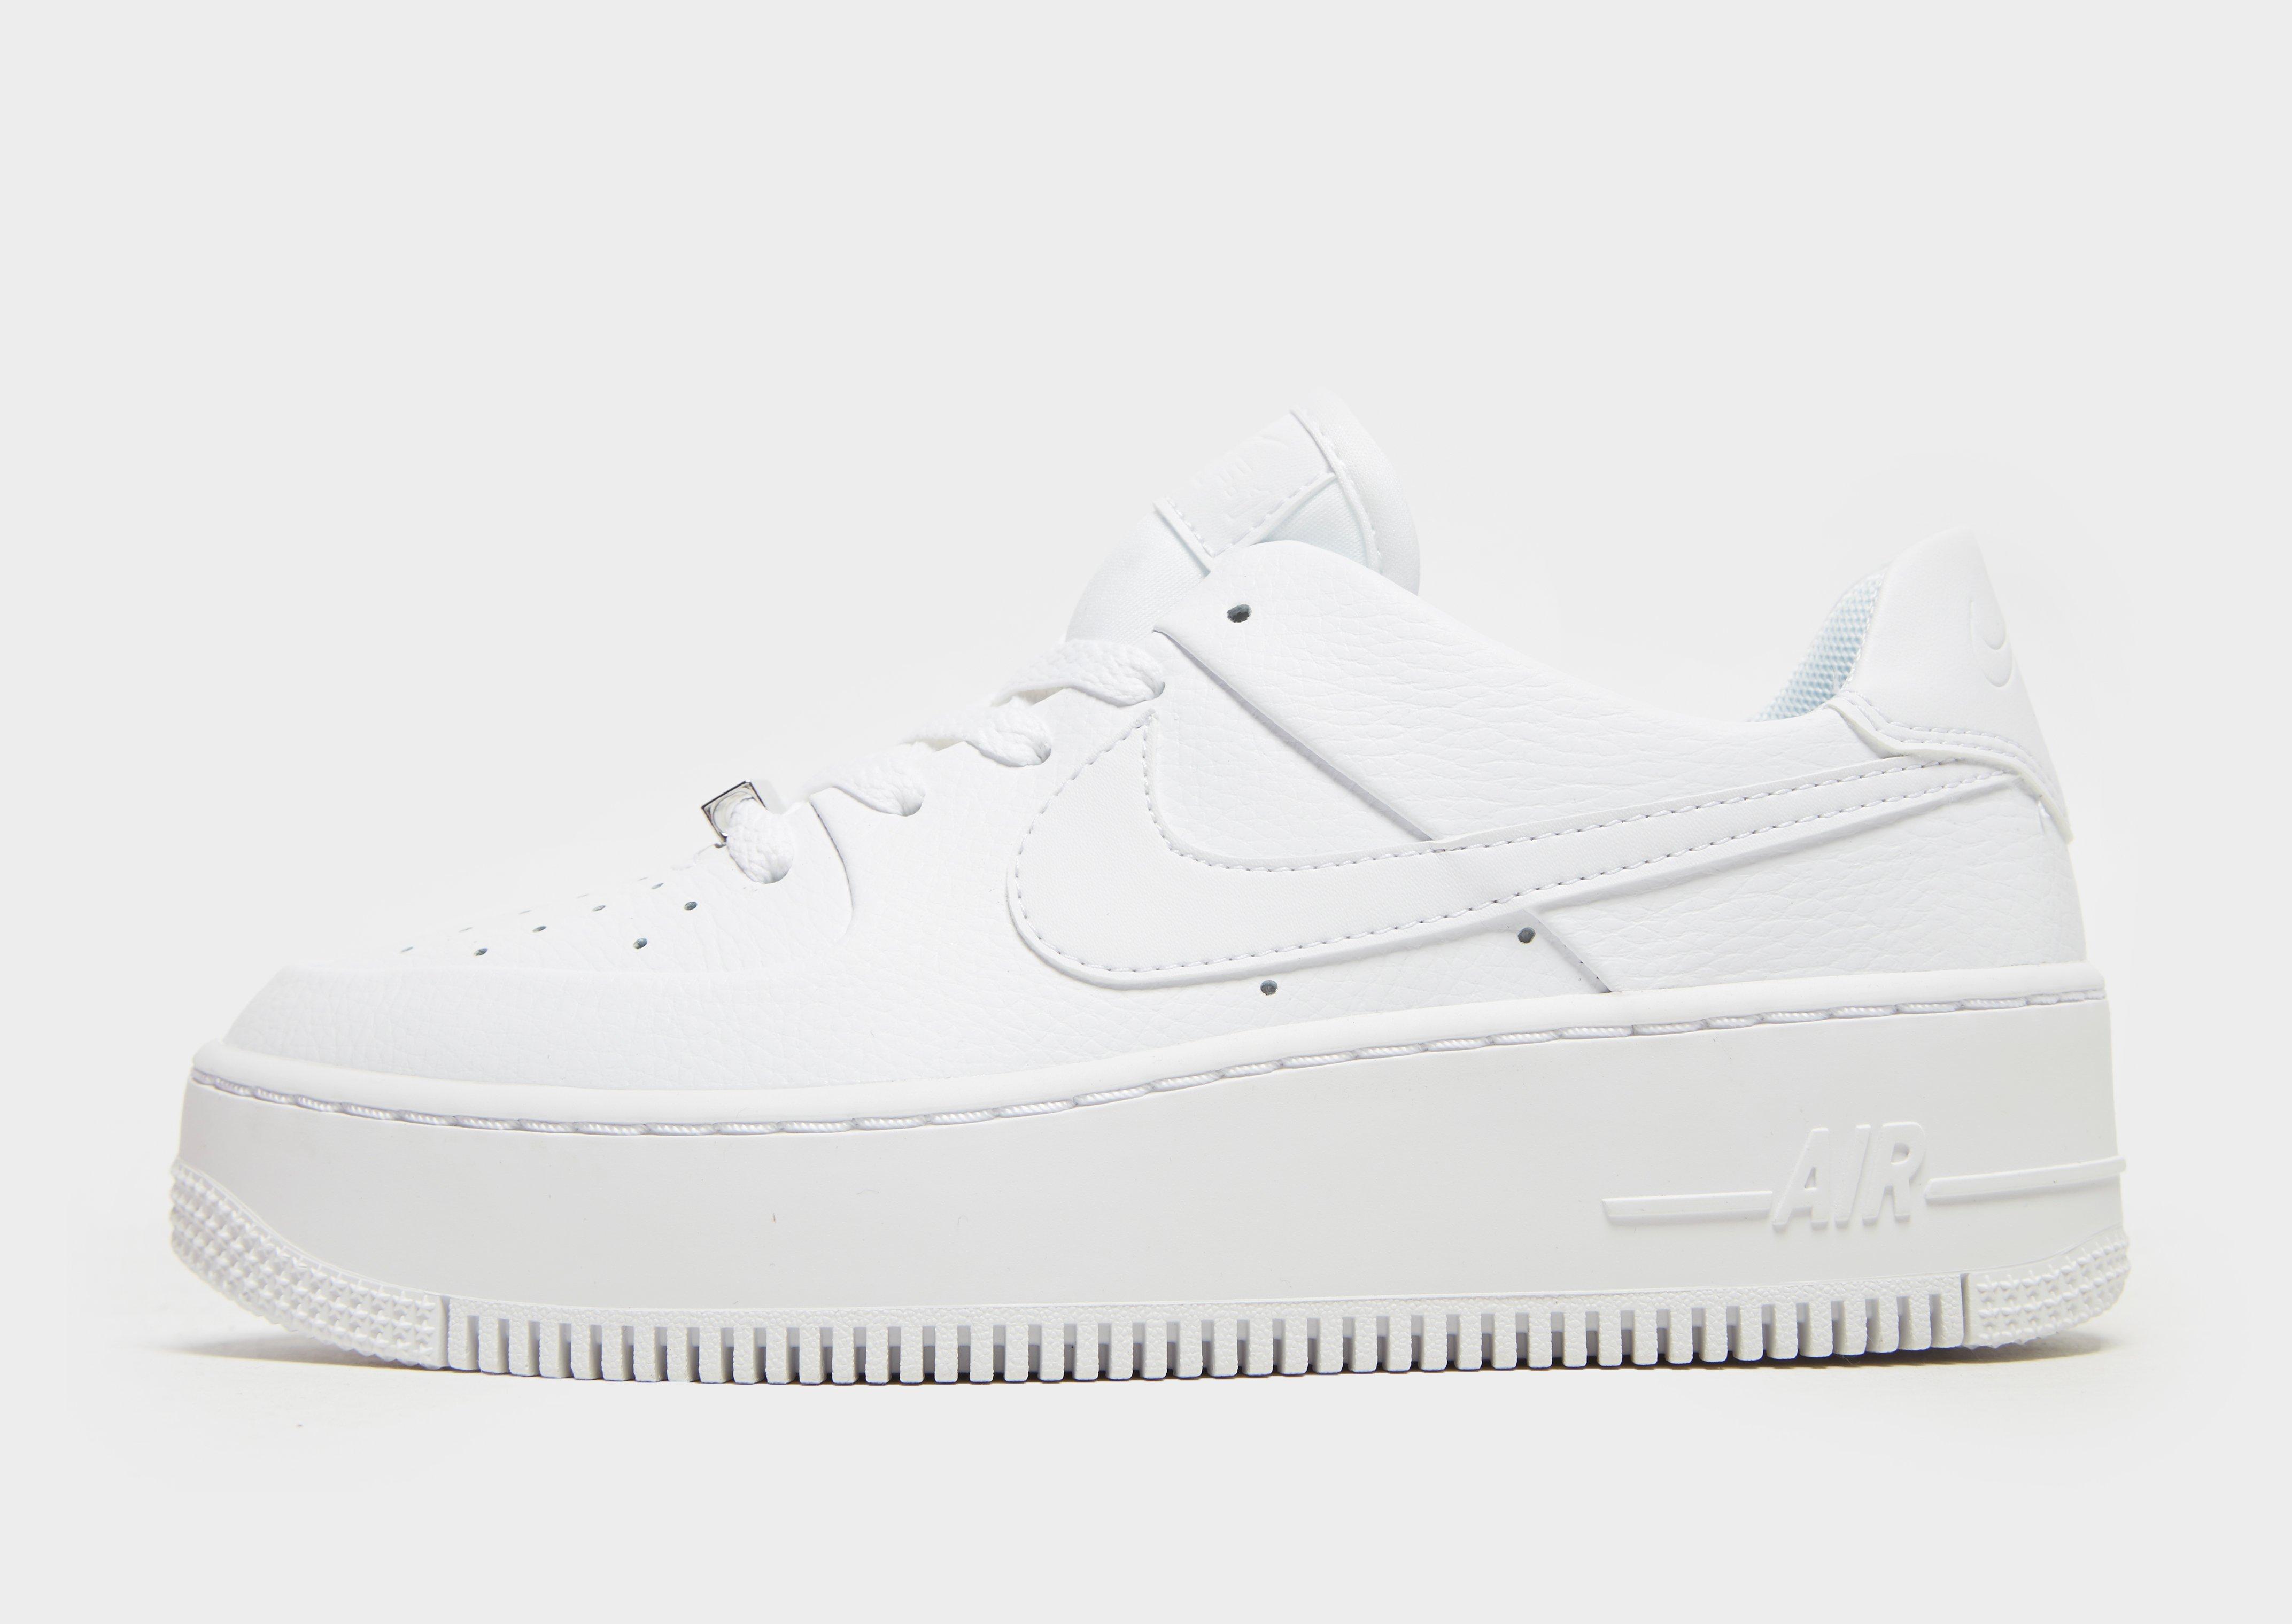 Acquista Nike Air Force 1 Sage Low Women's in Bianco